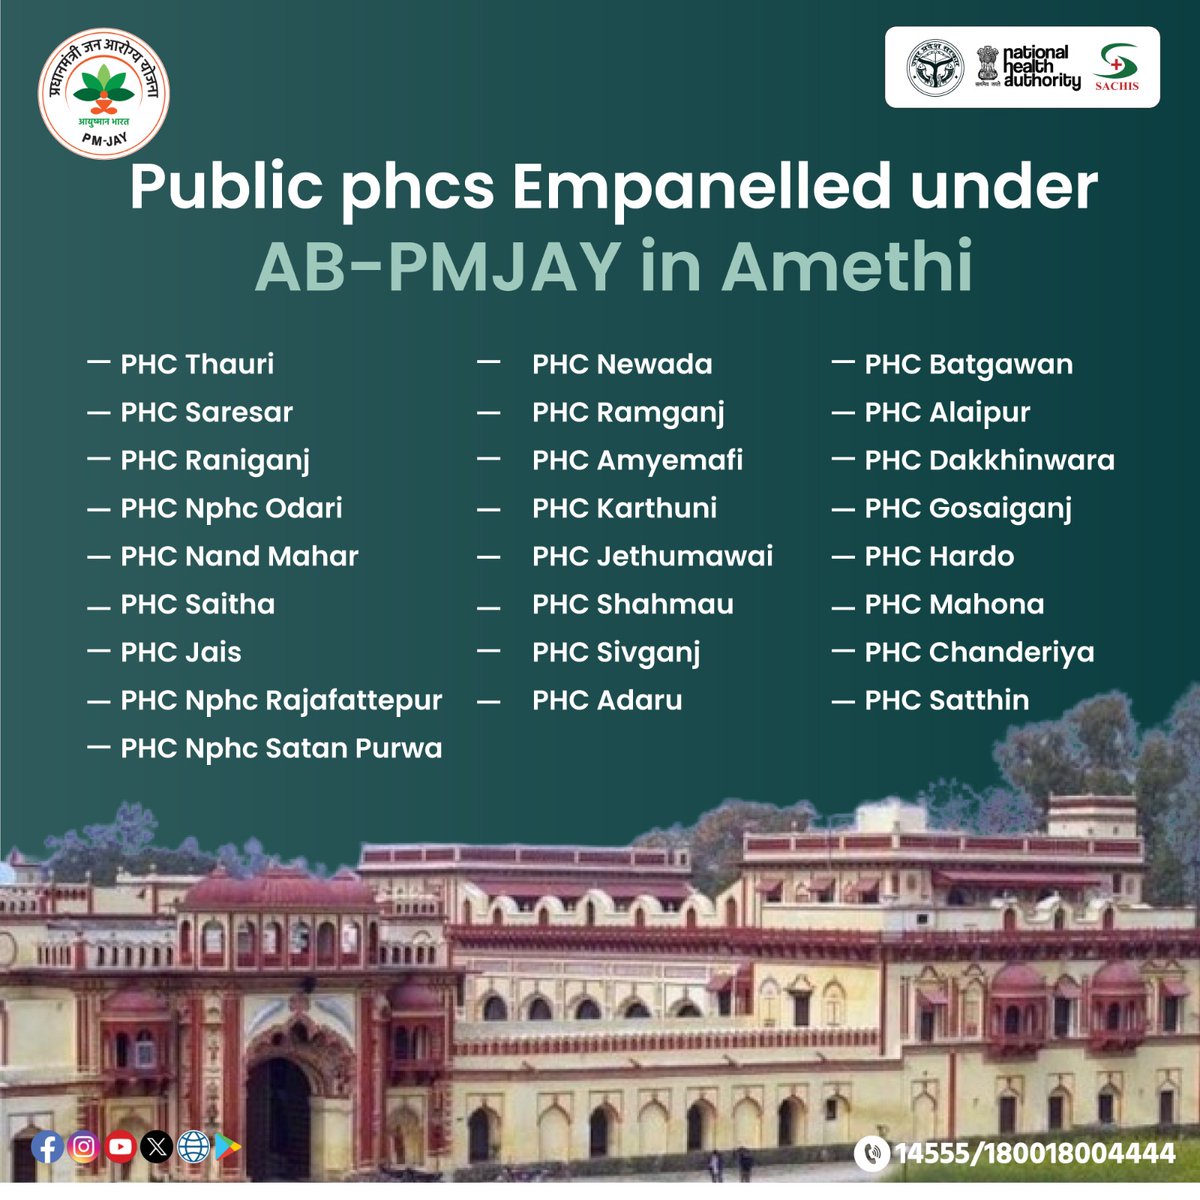 If you're in #Amethi and require treatment under PMJAY, head to your nearest PHC to obtain your #AyushmanCard. Below is a list of available PHCs in Amethi. #AyushmanBharat #UttarPradesh #freetreatment #healthandwellness #governmentschemes #publichospitals #PMJAY